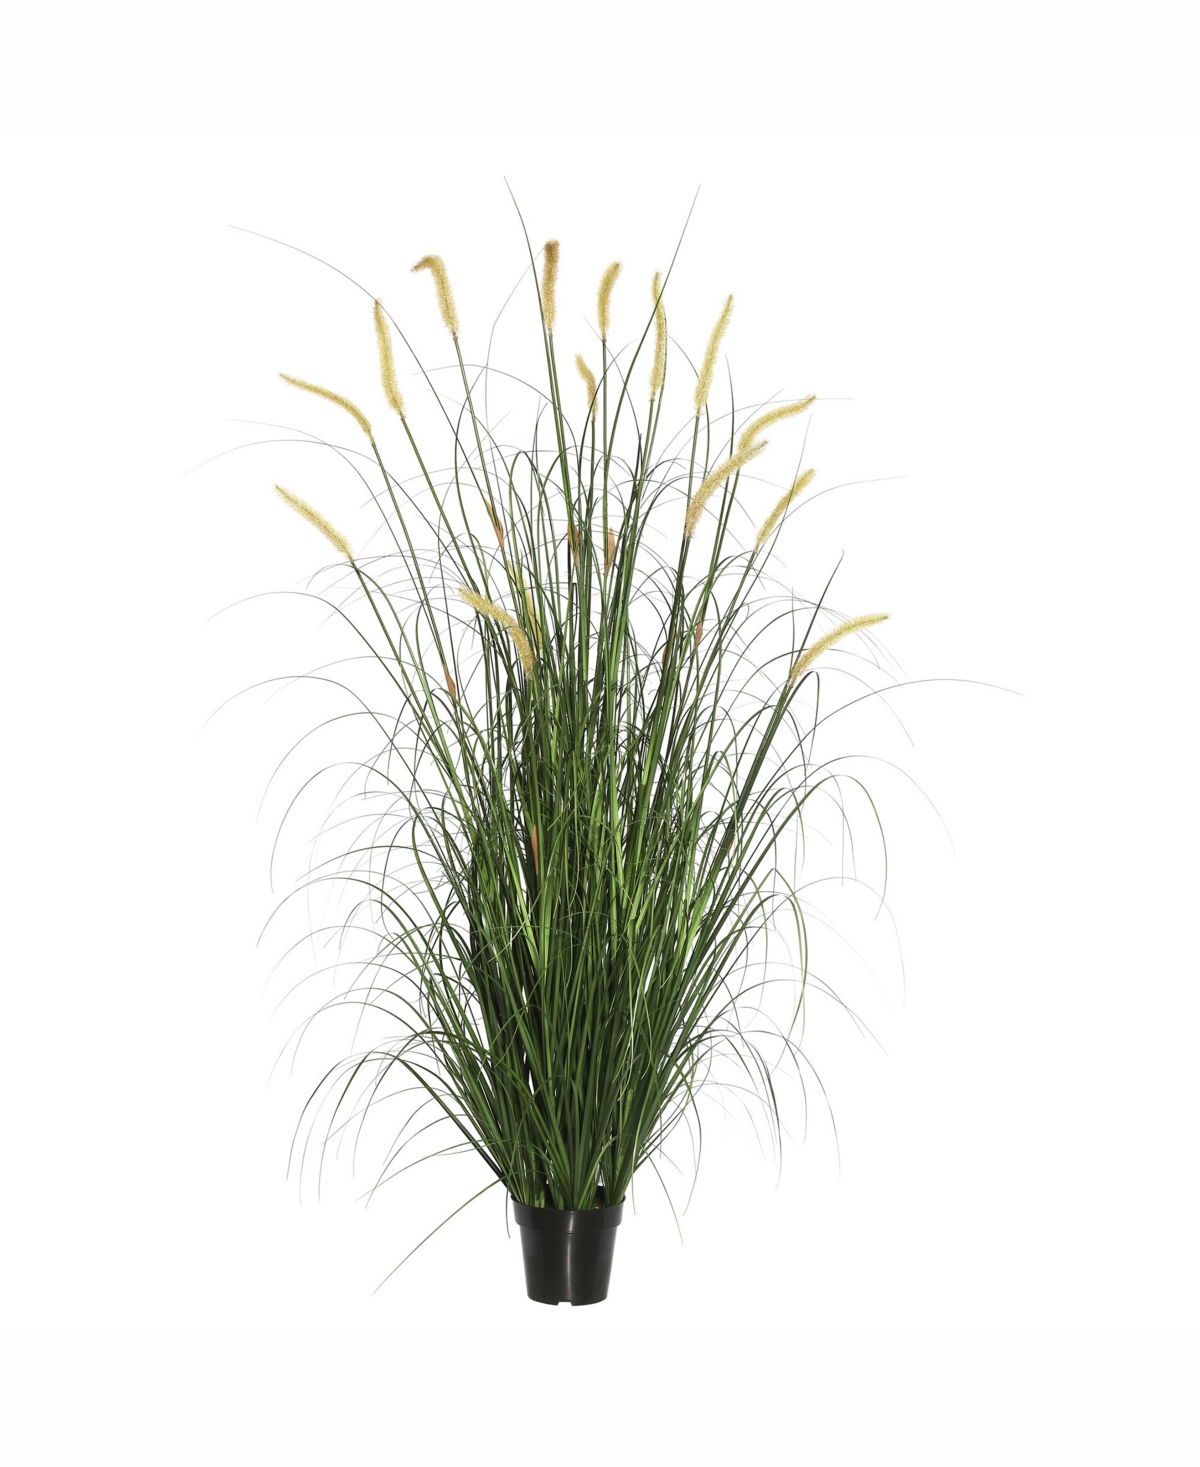 Vickerman 48" Pvc Artificial Potted Green Foxtail Grass X 411 In No Color